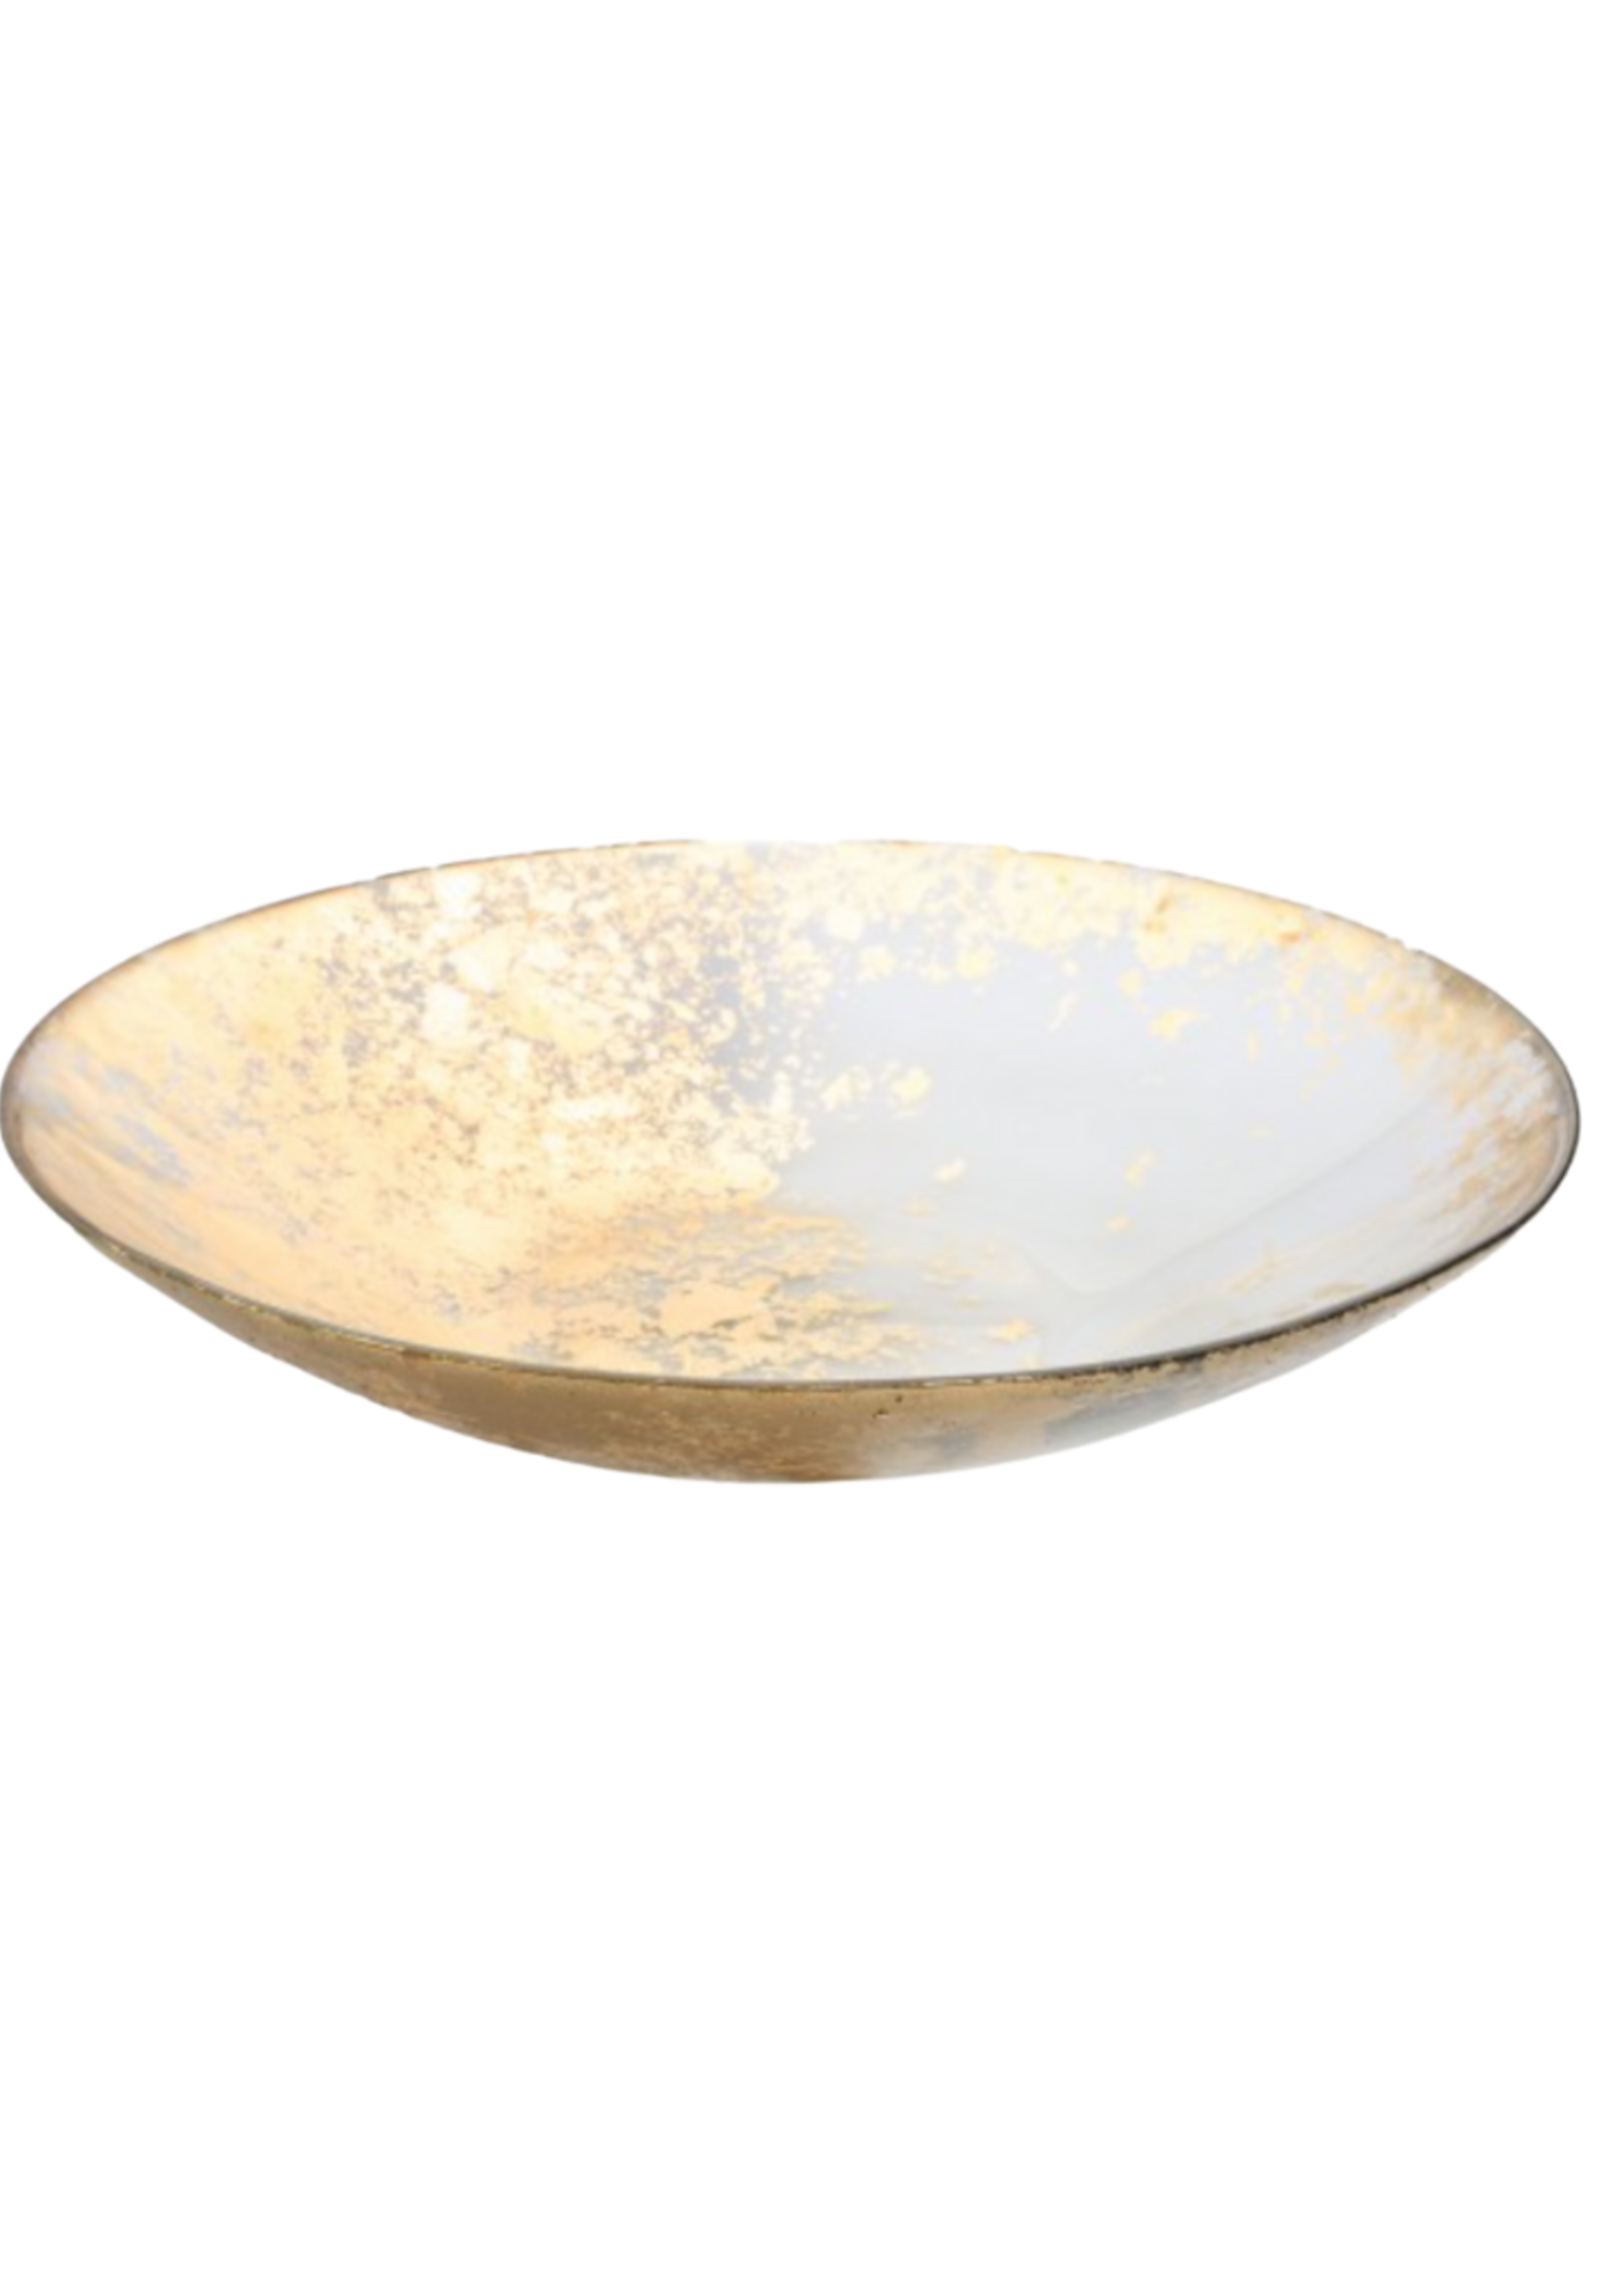 Smoked Glass Bowl w/ Scattered Gold Design